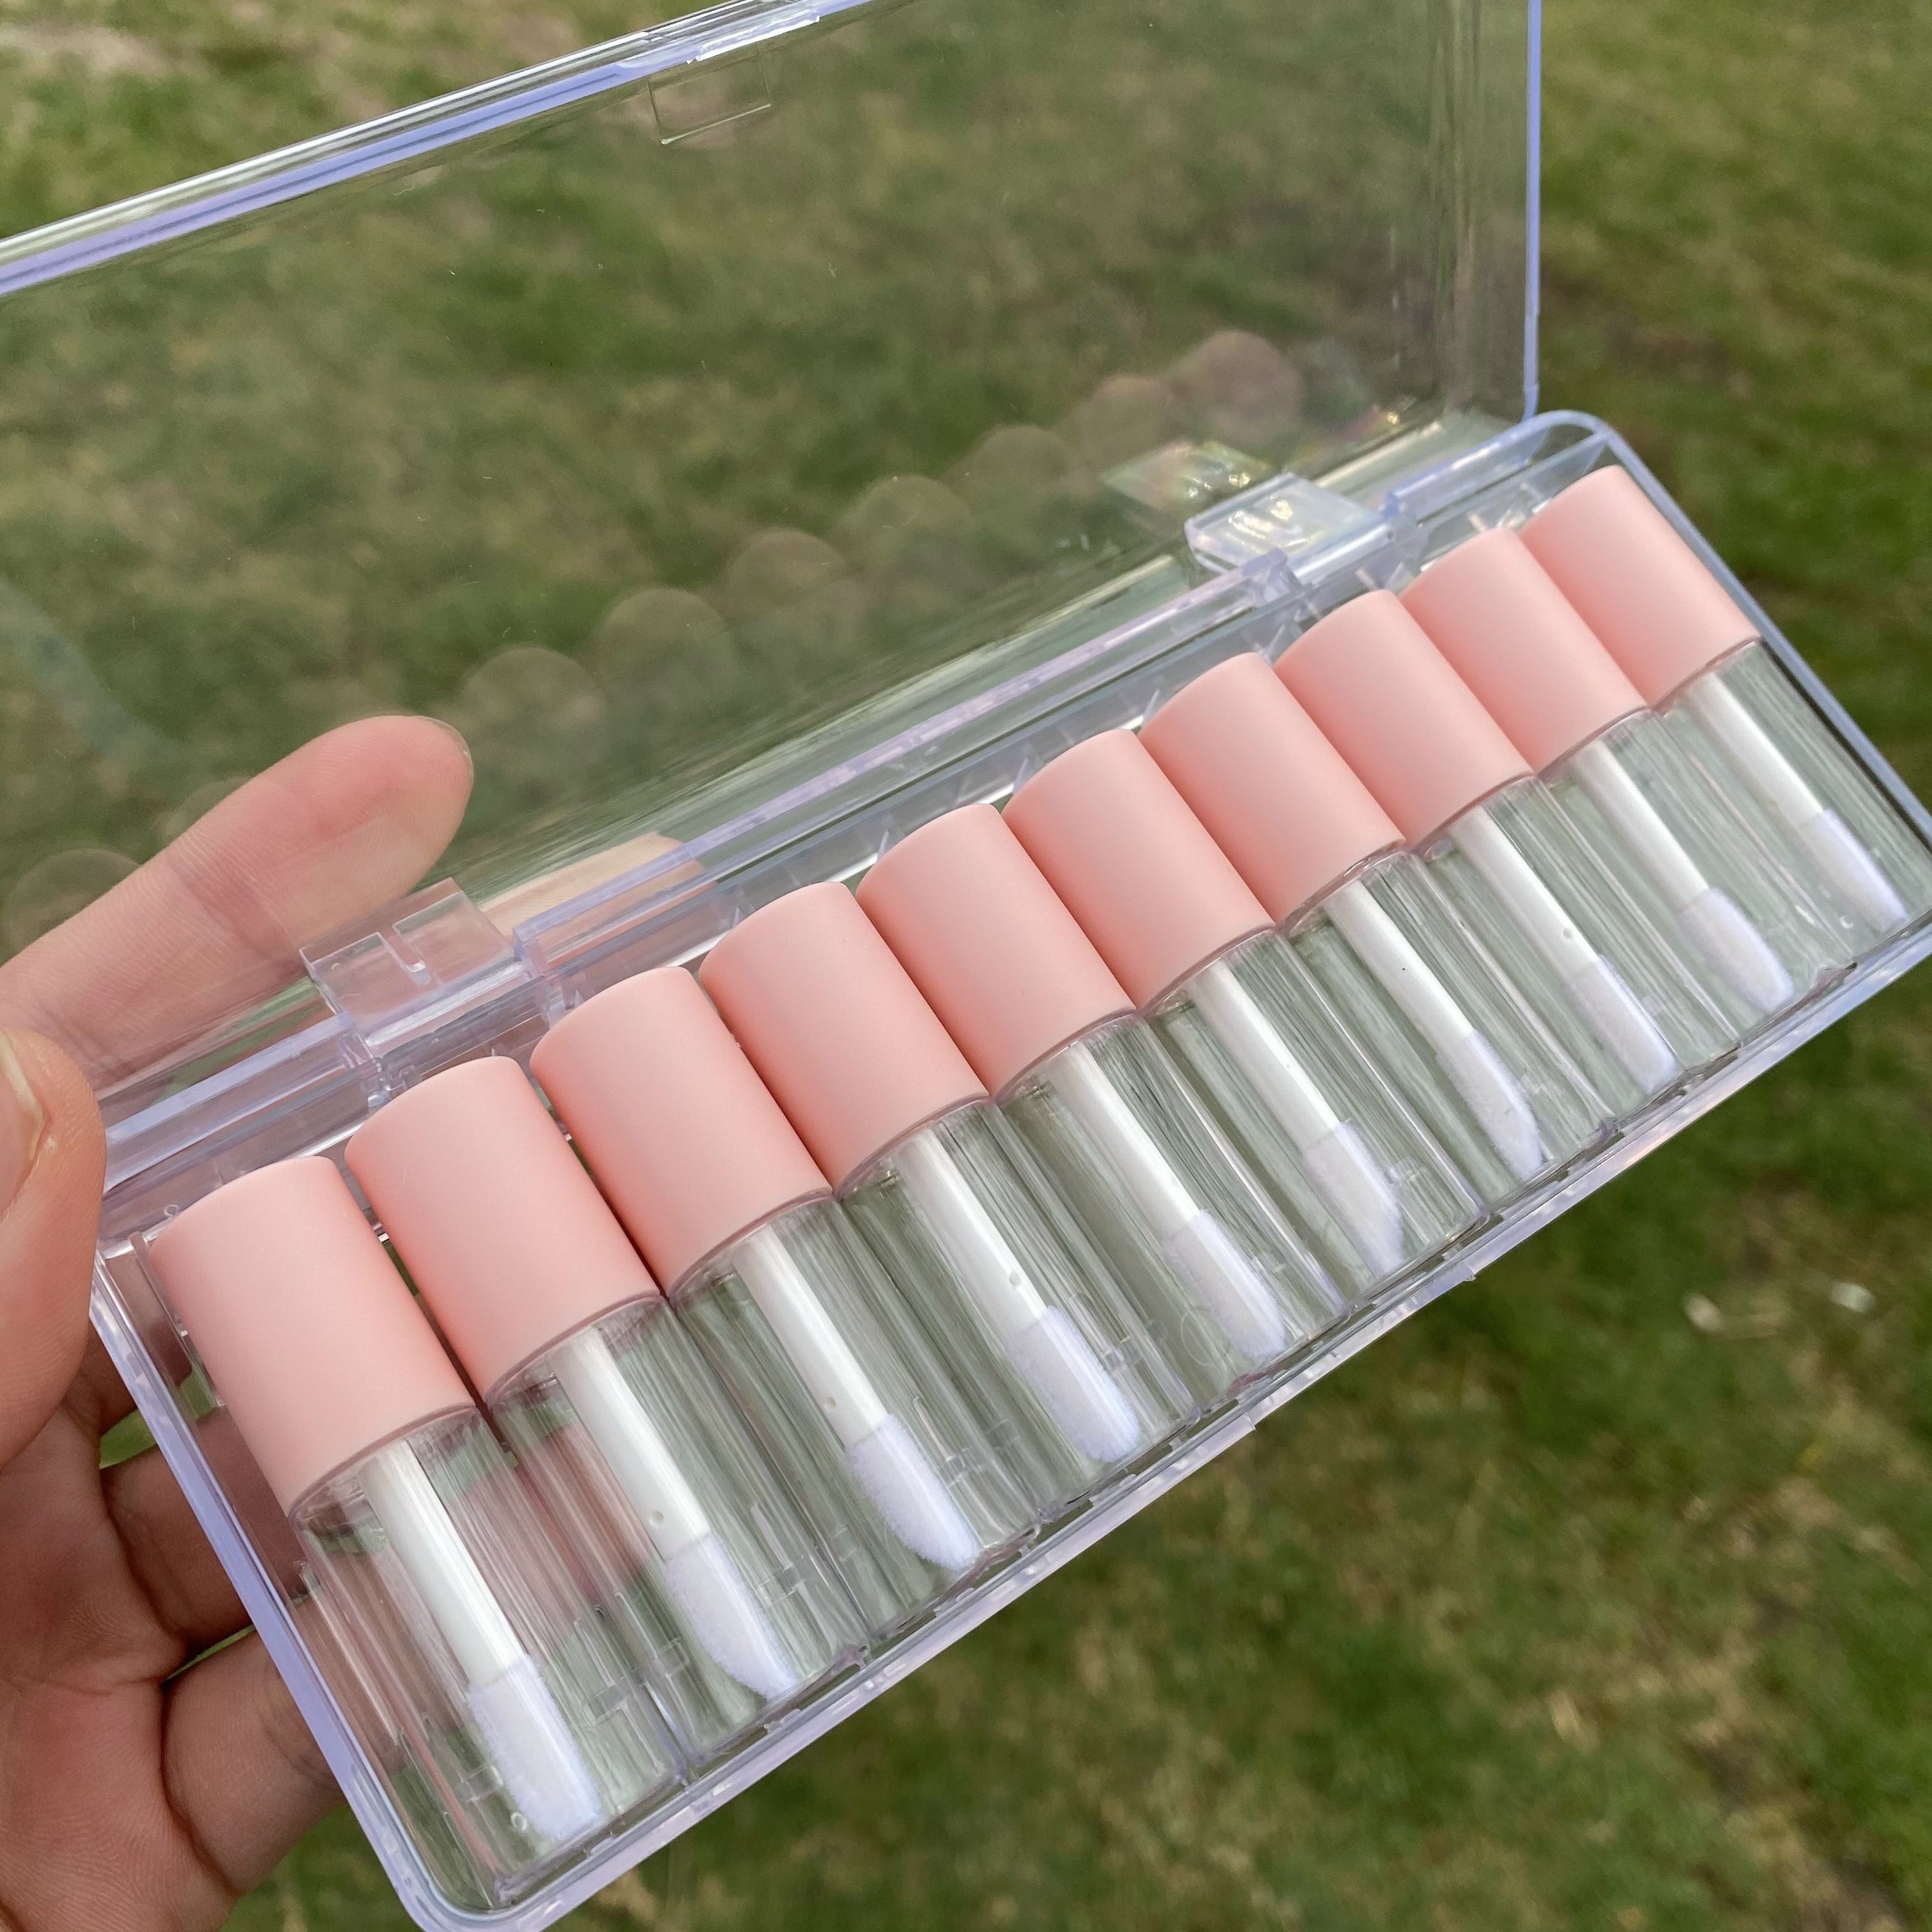 

10-piece Mini Lip Gloss Tubes Set - 4ml Pink Round Clear Diy Lipstick Containers With Twist Cap & Storage Box, Fragrance-free